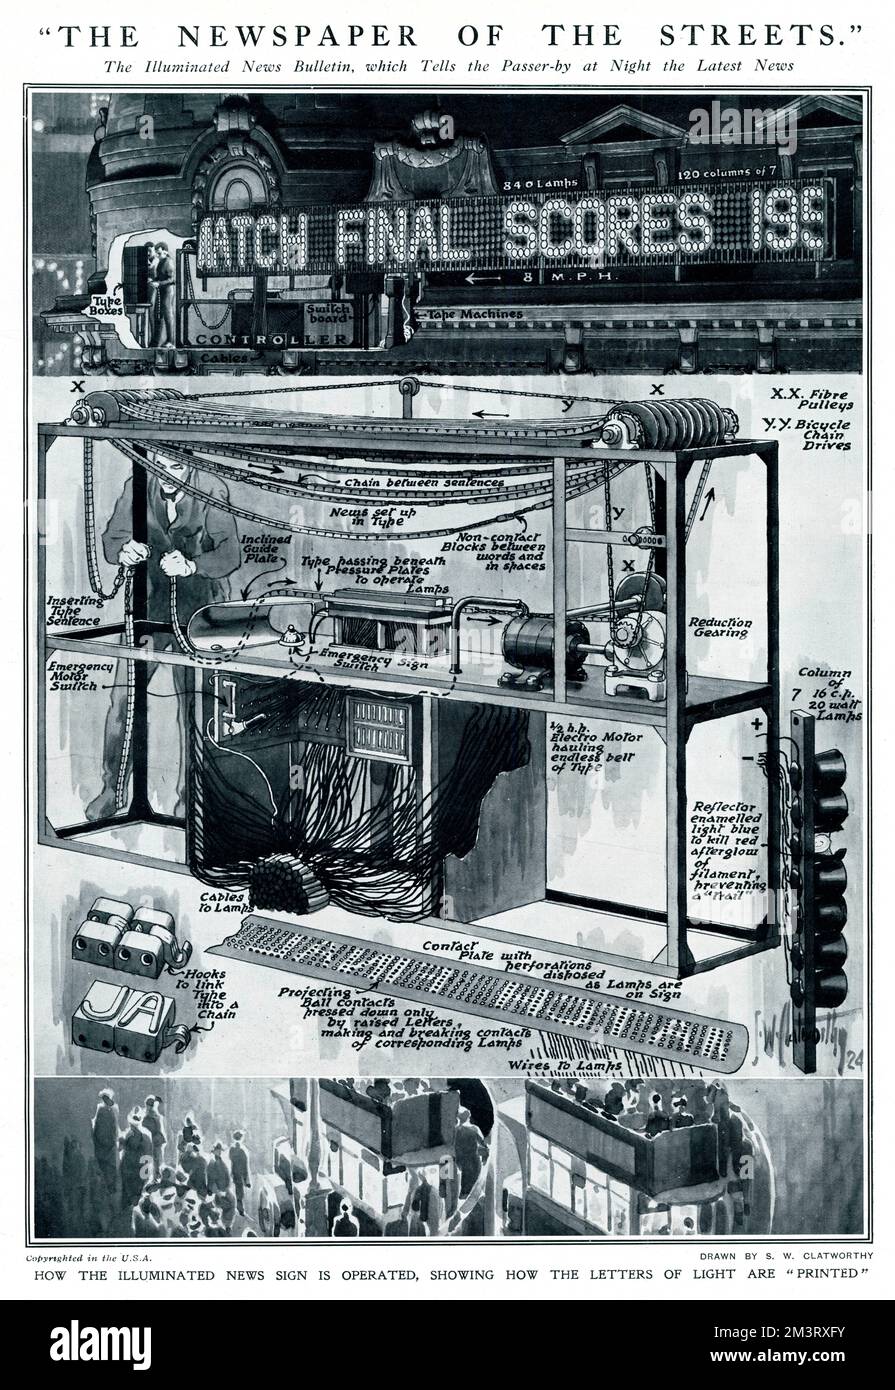 The Newspaper of the Streets.  The illuminated news bulletin which tells passer-by at night the latest news.  Diagram by S. W. Clatworthy in The Sphere demonstrating how an illuminated sign is operated.  The diagram here shows the Morning Post building, later to become Inveresk House, home of Illustrated Newspapers Ltd.  The signs, which used around 300 lamps were made by (wait for it), the Scintillating Sign Company of Fleet Street, who were patentees and owners of the design.  According to The Sphere, they were very helpful to the artist while he was making this drawing.       Date: 1924 Stock Photo